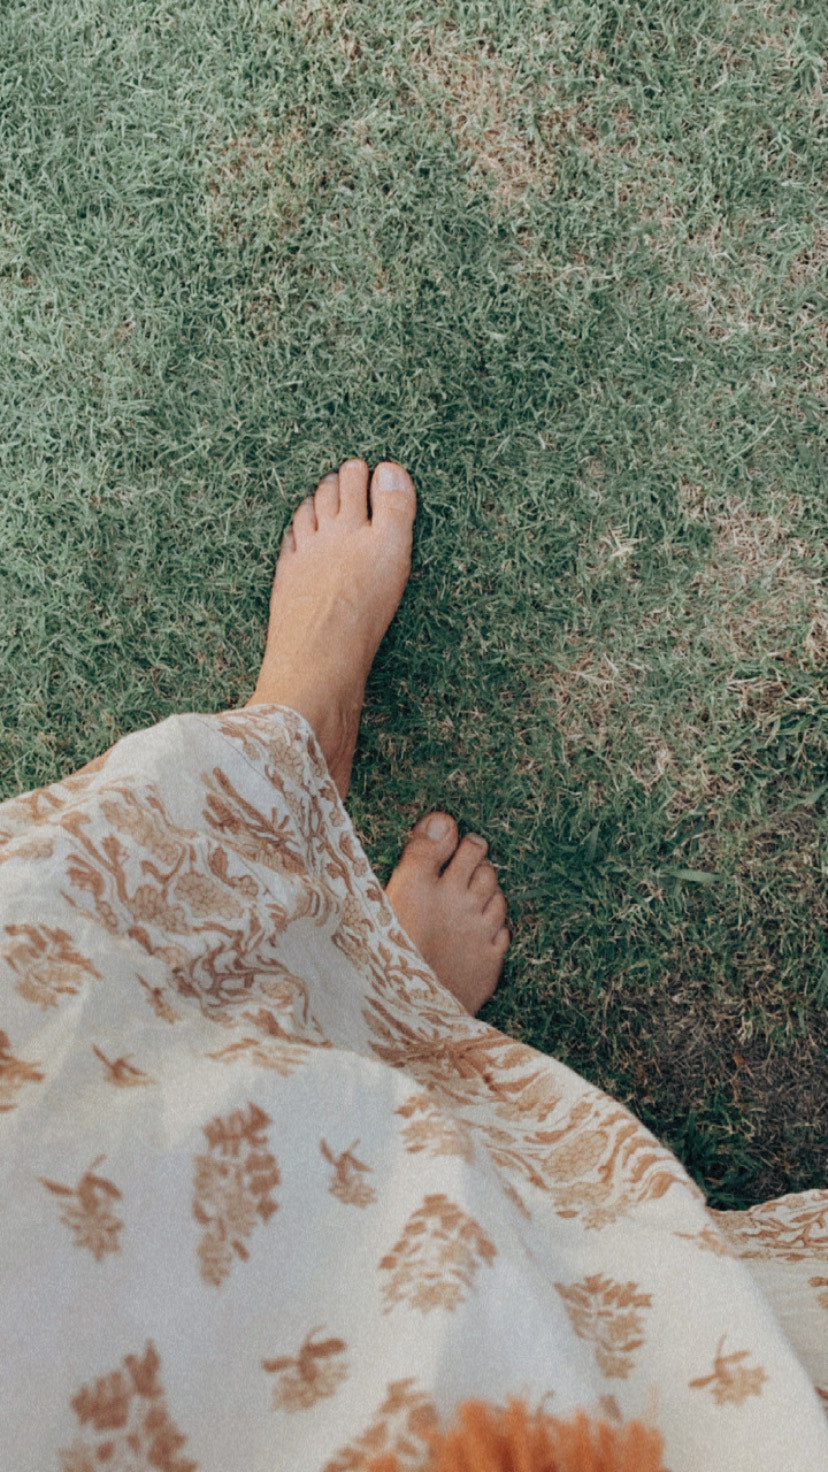 Ground yourself - How Earthing benefits the Body